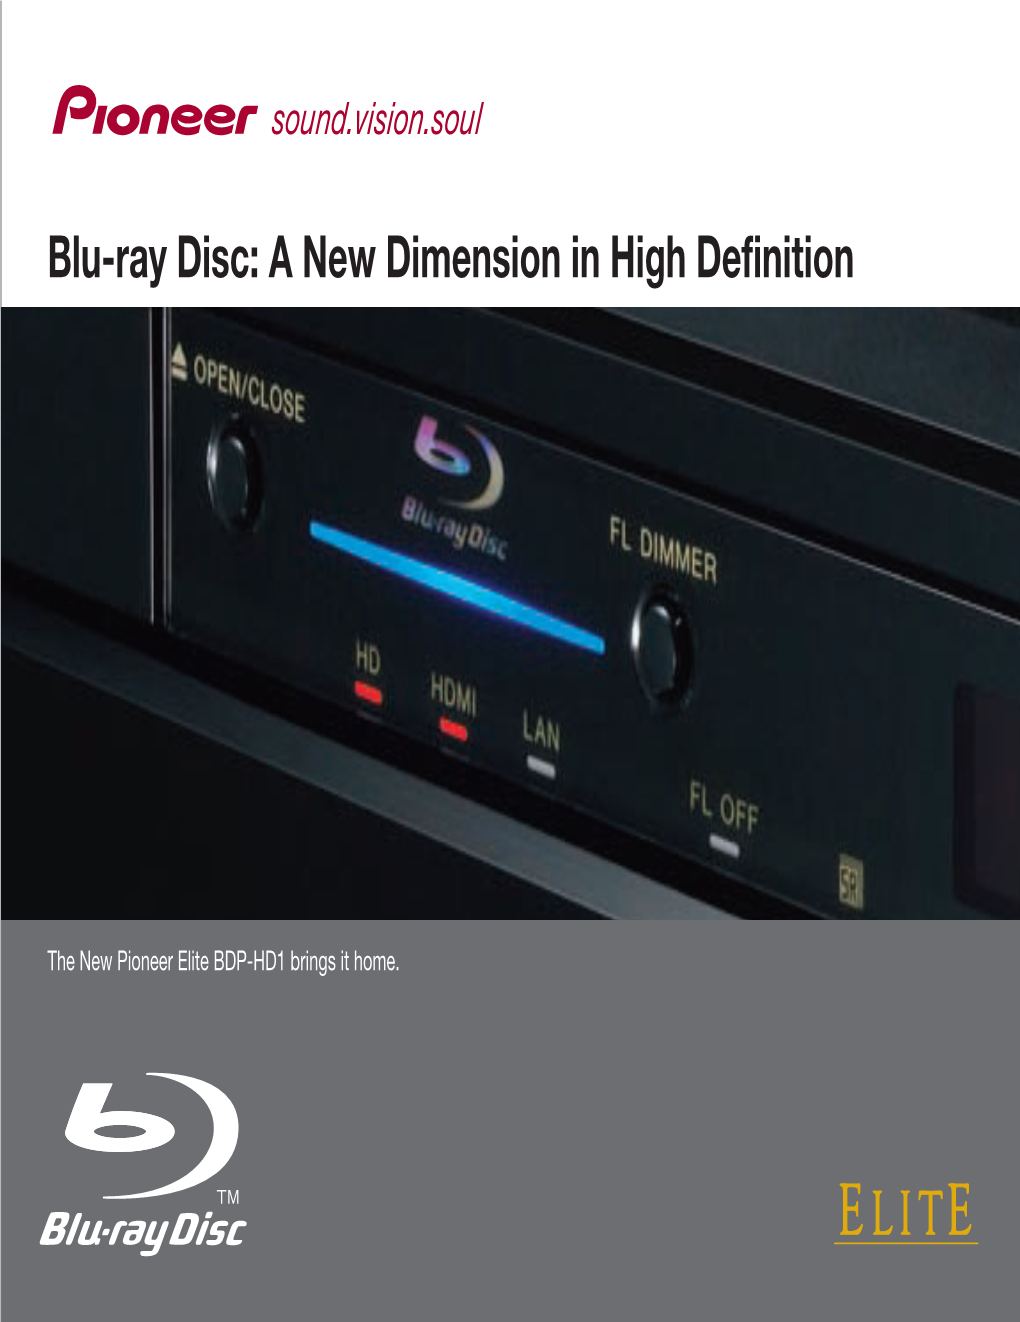 Blu-Ray Disc: a New Dimension in High Definition